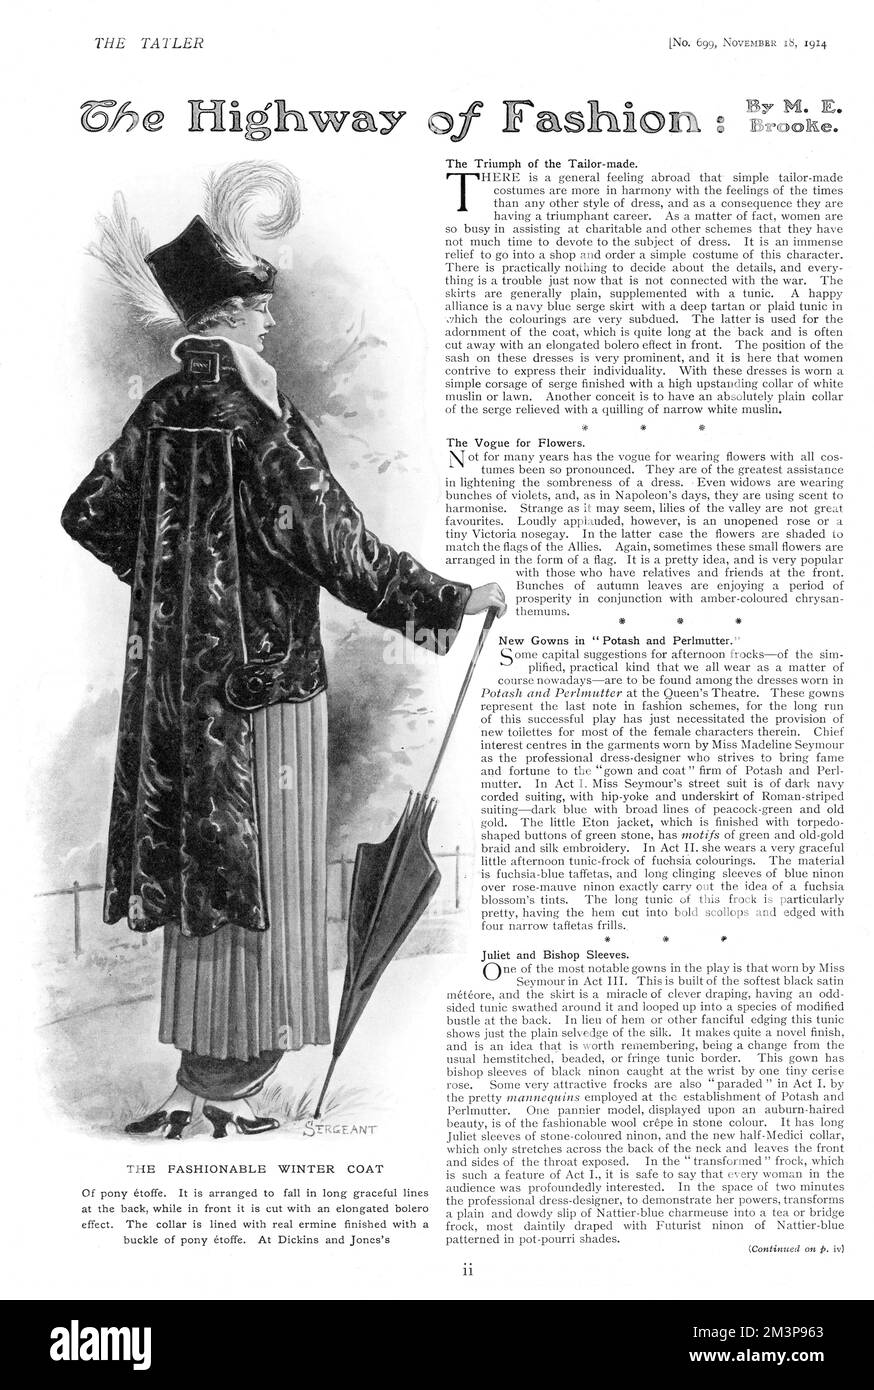 The fashionable winter coat of pony etoffe [material]. It is arranged to fall in long, graceful lines at the back, while in front it is cut with an elongated bolero effect. The collar is lined with real ermine finished with a buckle of pony etoffe. At Dickins and Jones's. Illustration to The Highway of Fashion by M.E. Brooke, who writes, 'there is a general feeling abroad that simple tailor-made costumes are more in harmony with the times...everything is a trouble just now that is not connected with the war.'     Date: 1914 Stock Photo